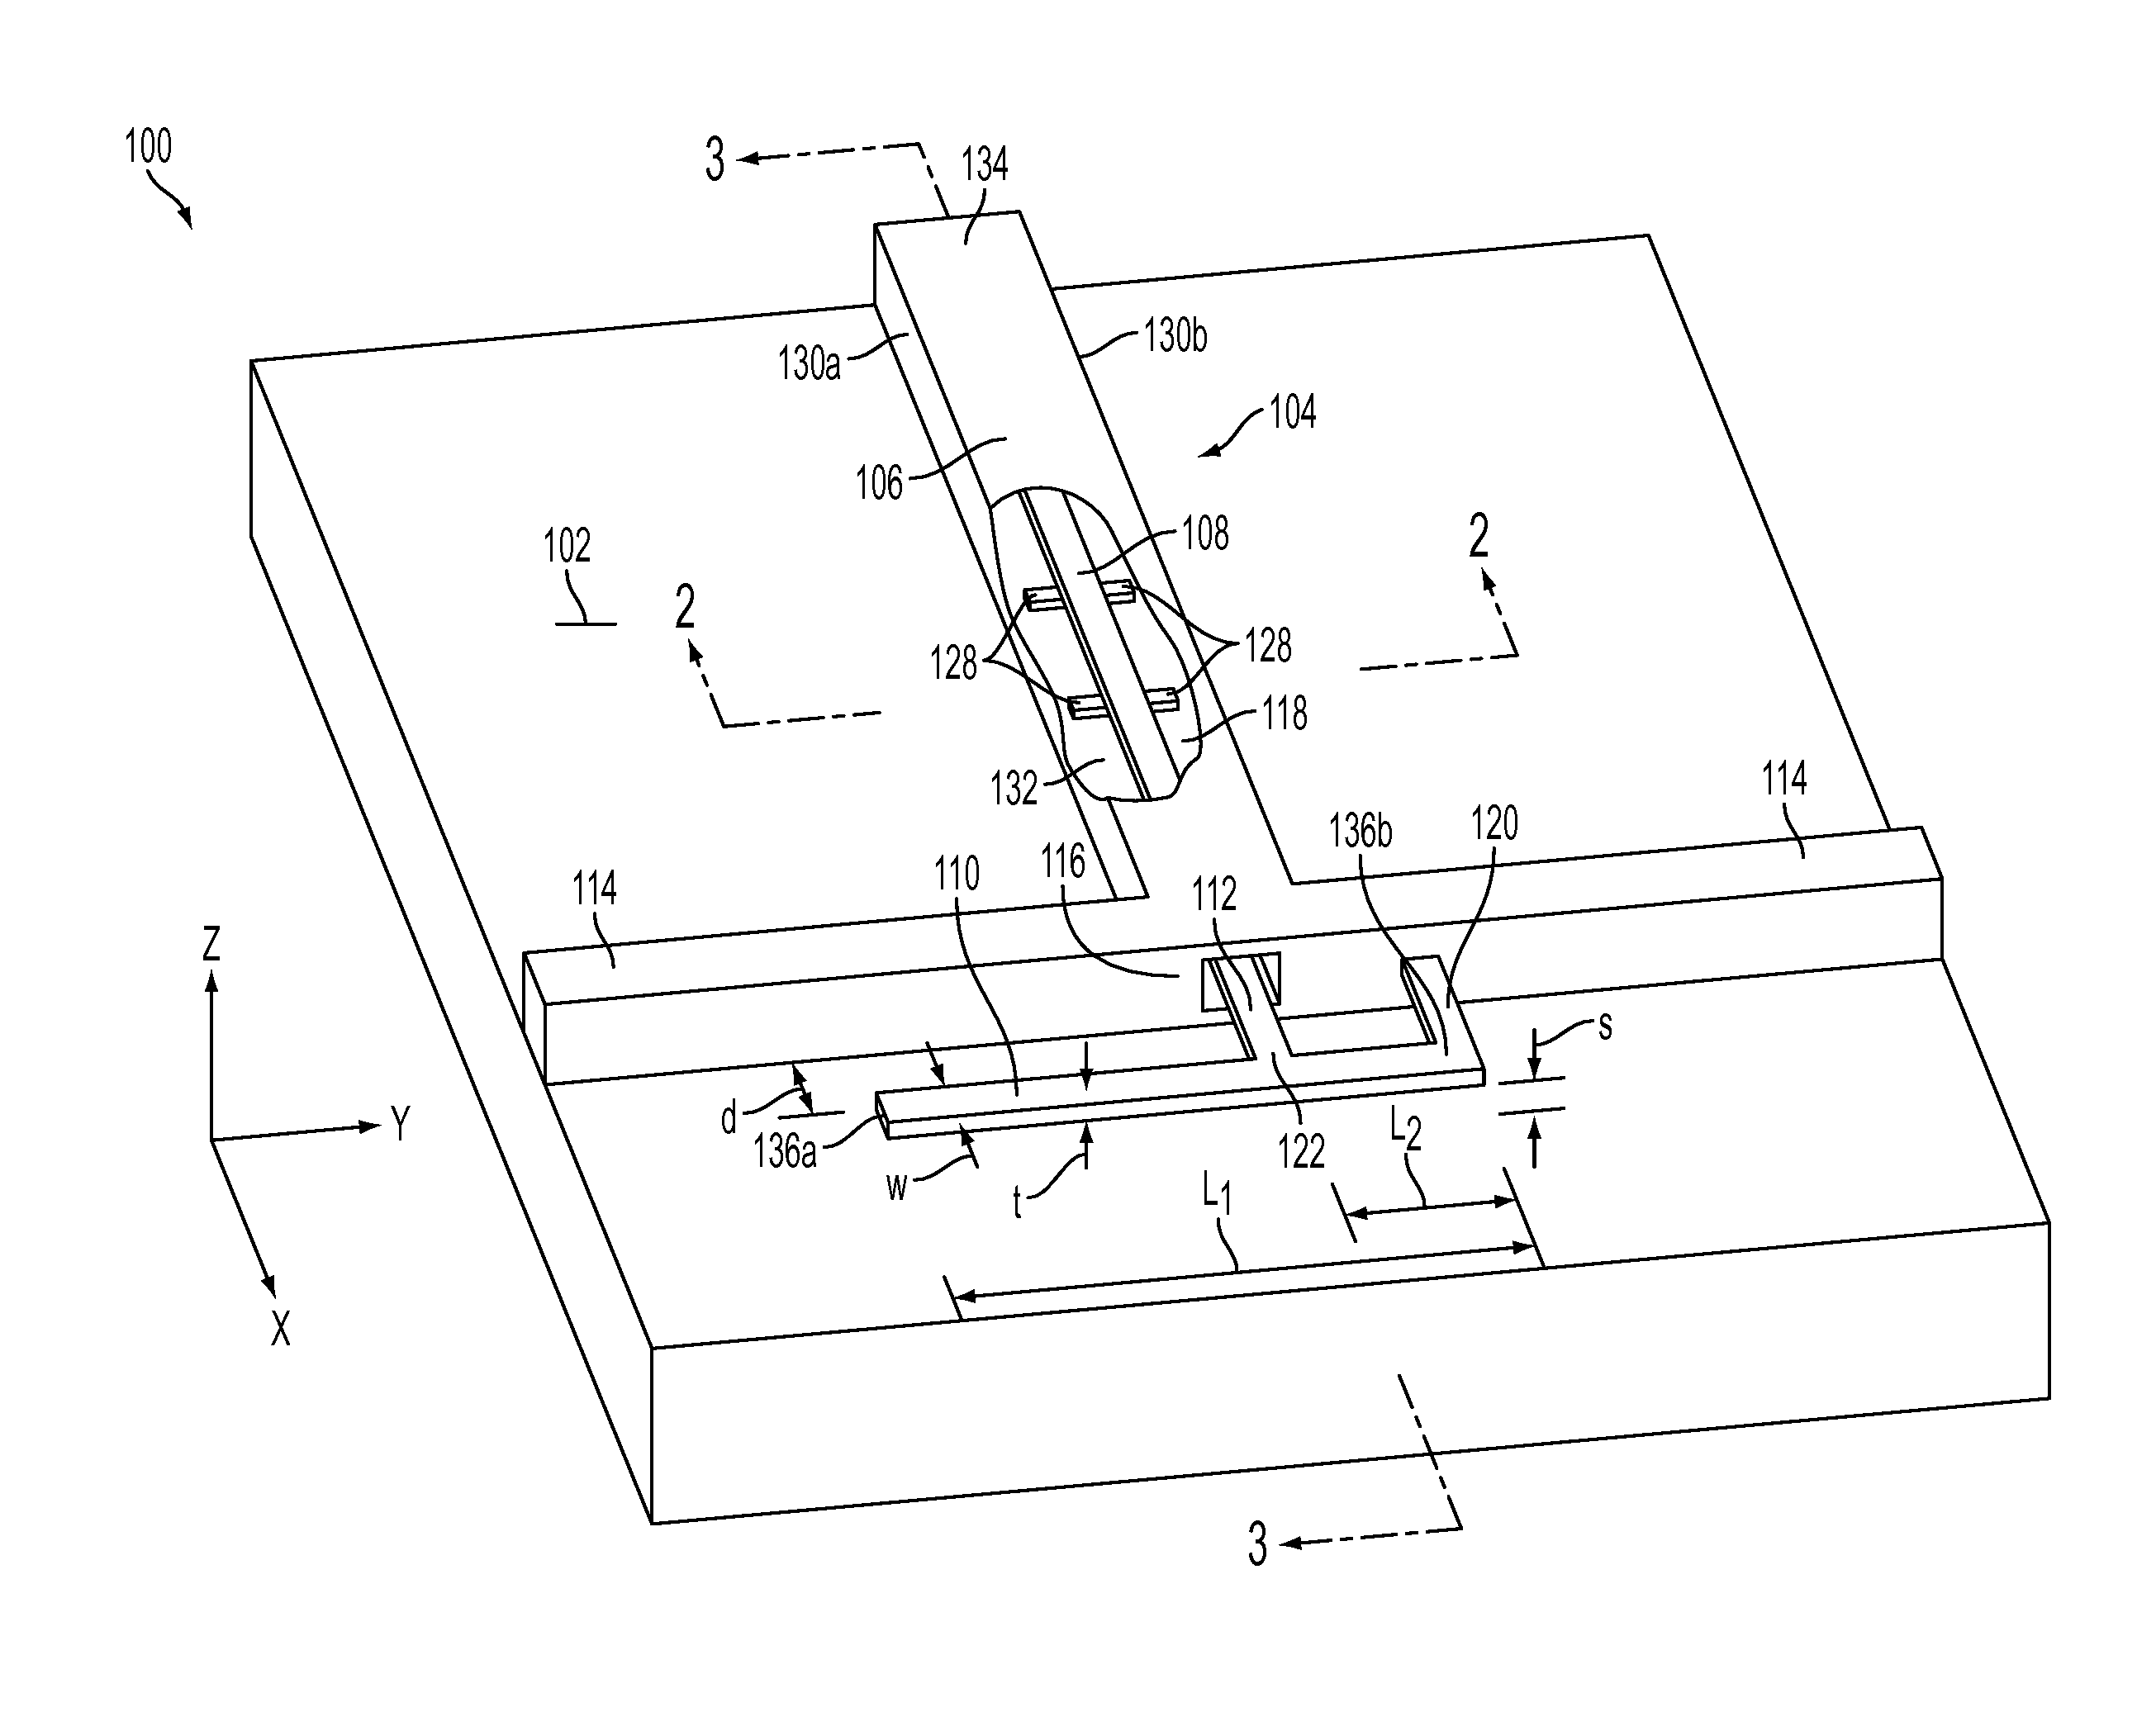 Wafer-level RF transmission and radiation devices